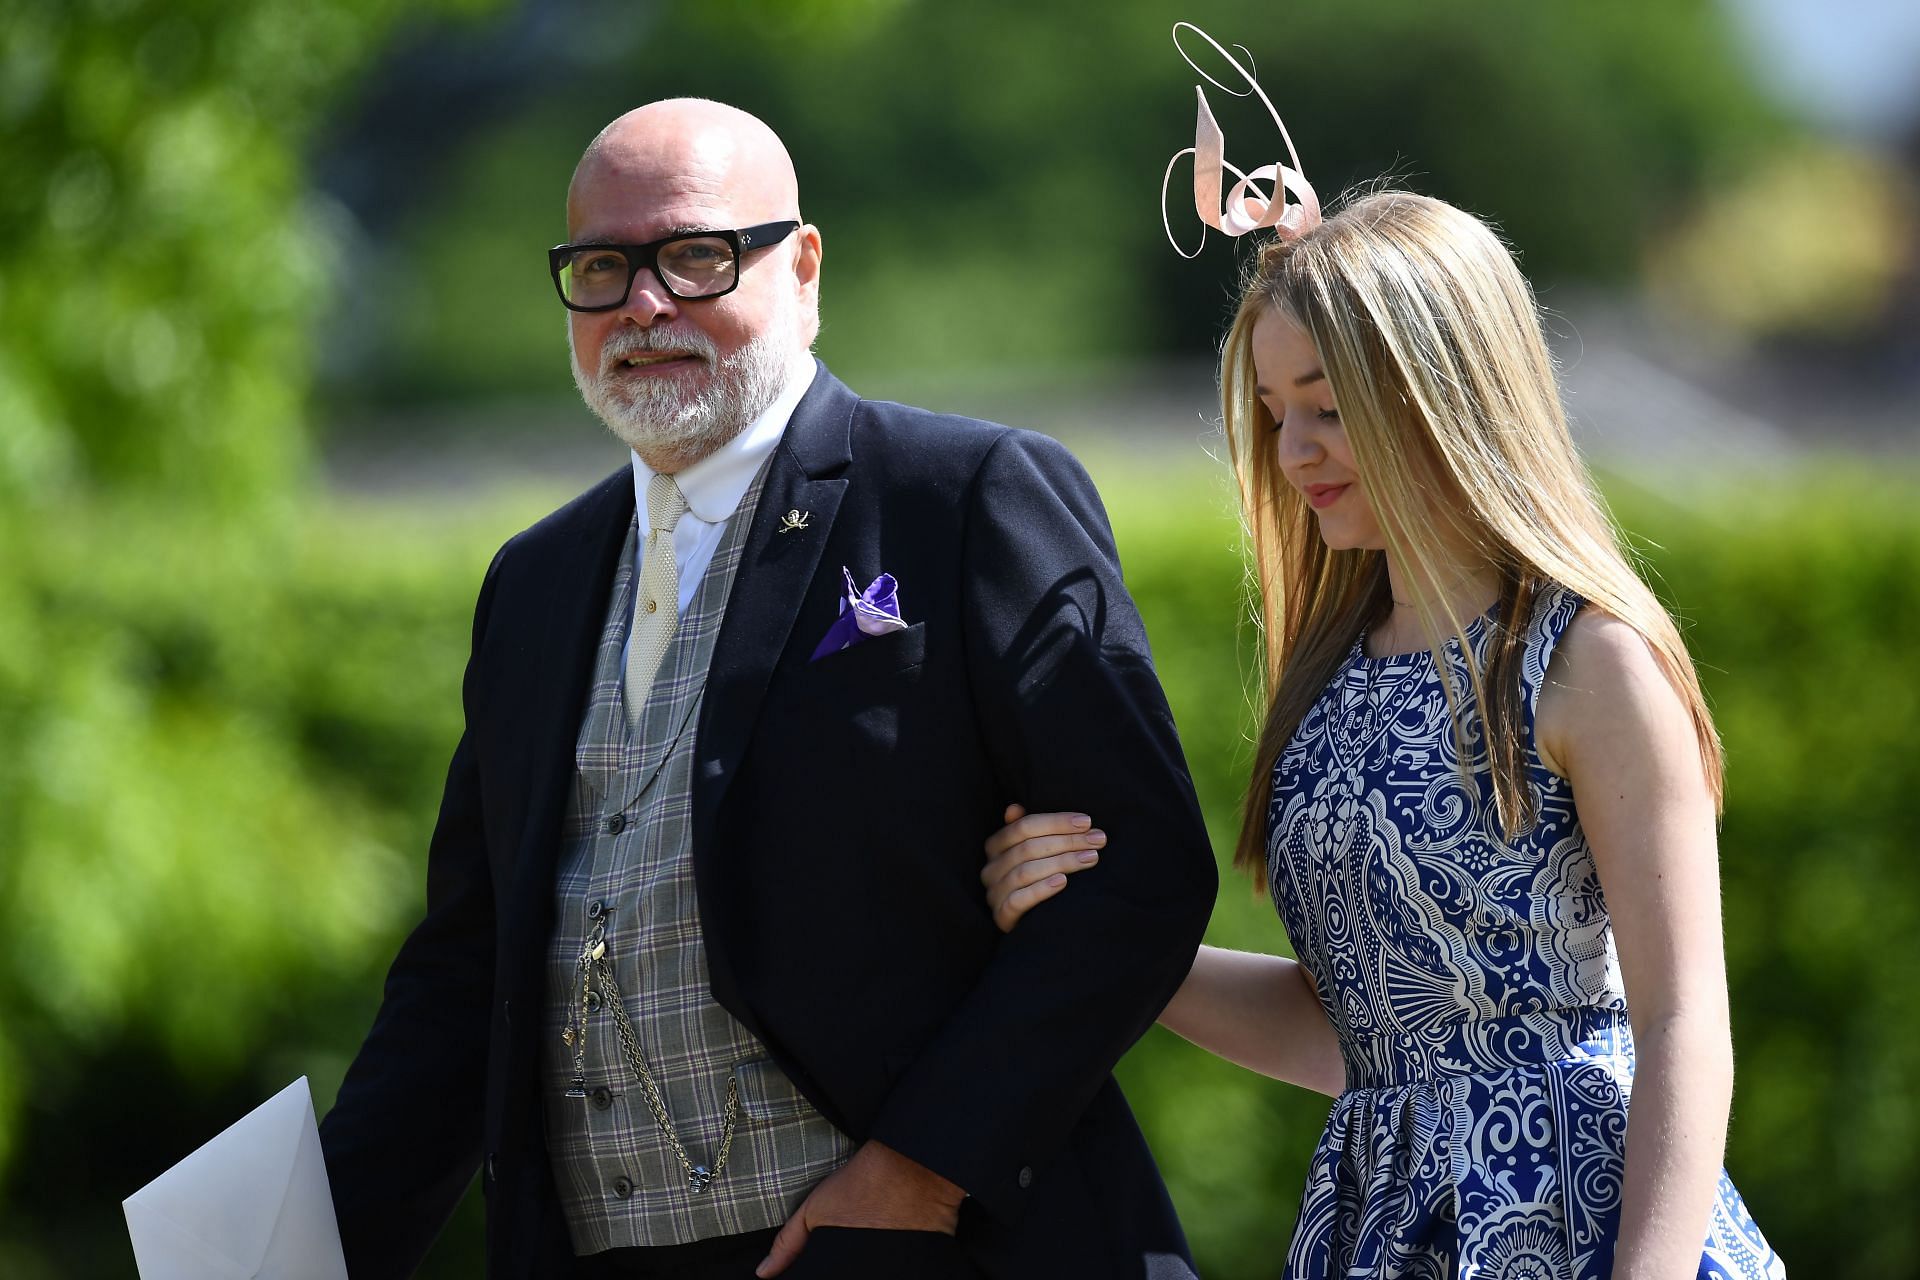 Gary Goldsmith (L), uncle of the bride attends the wedding of Pippa Middleton and James Matthews (Image via Getty)